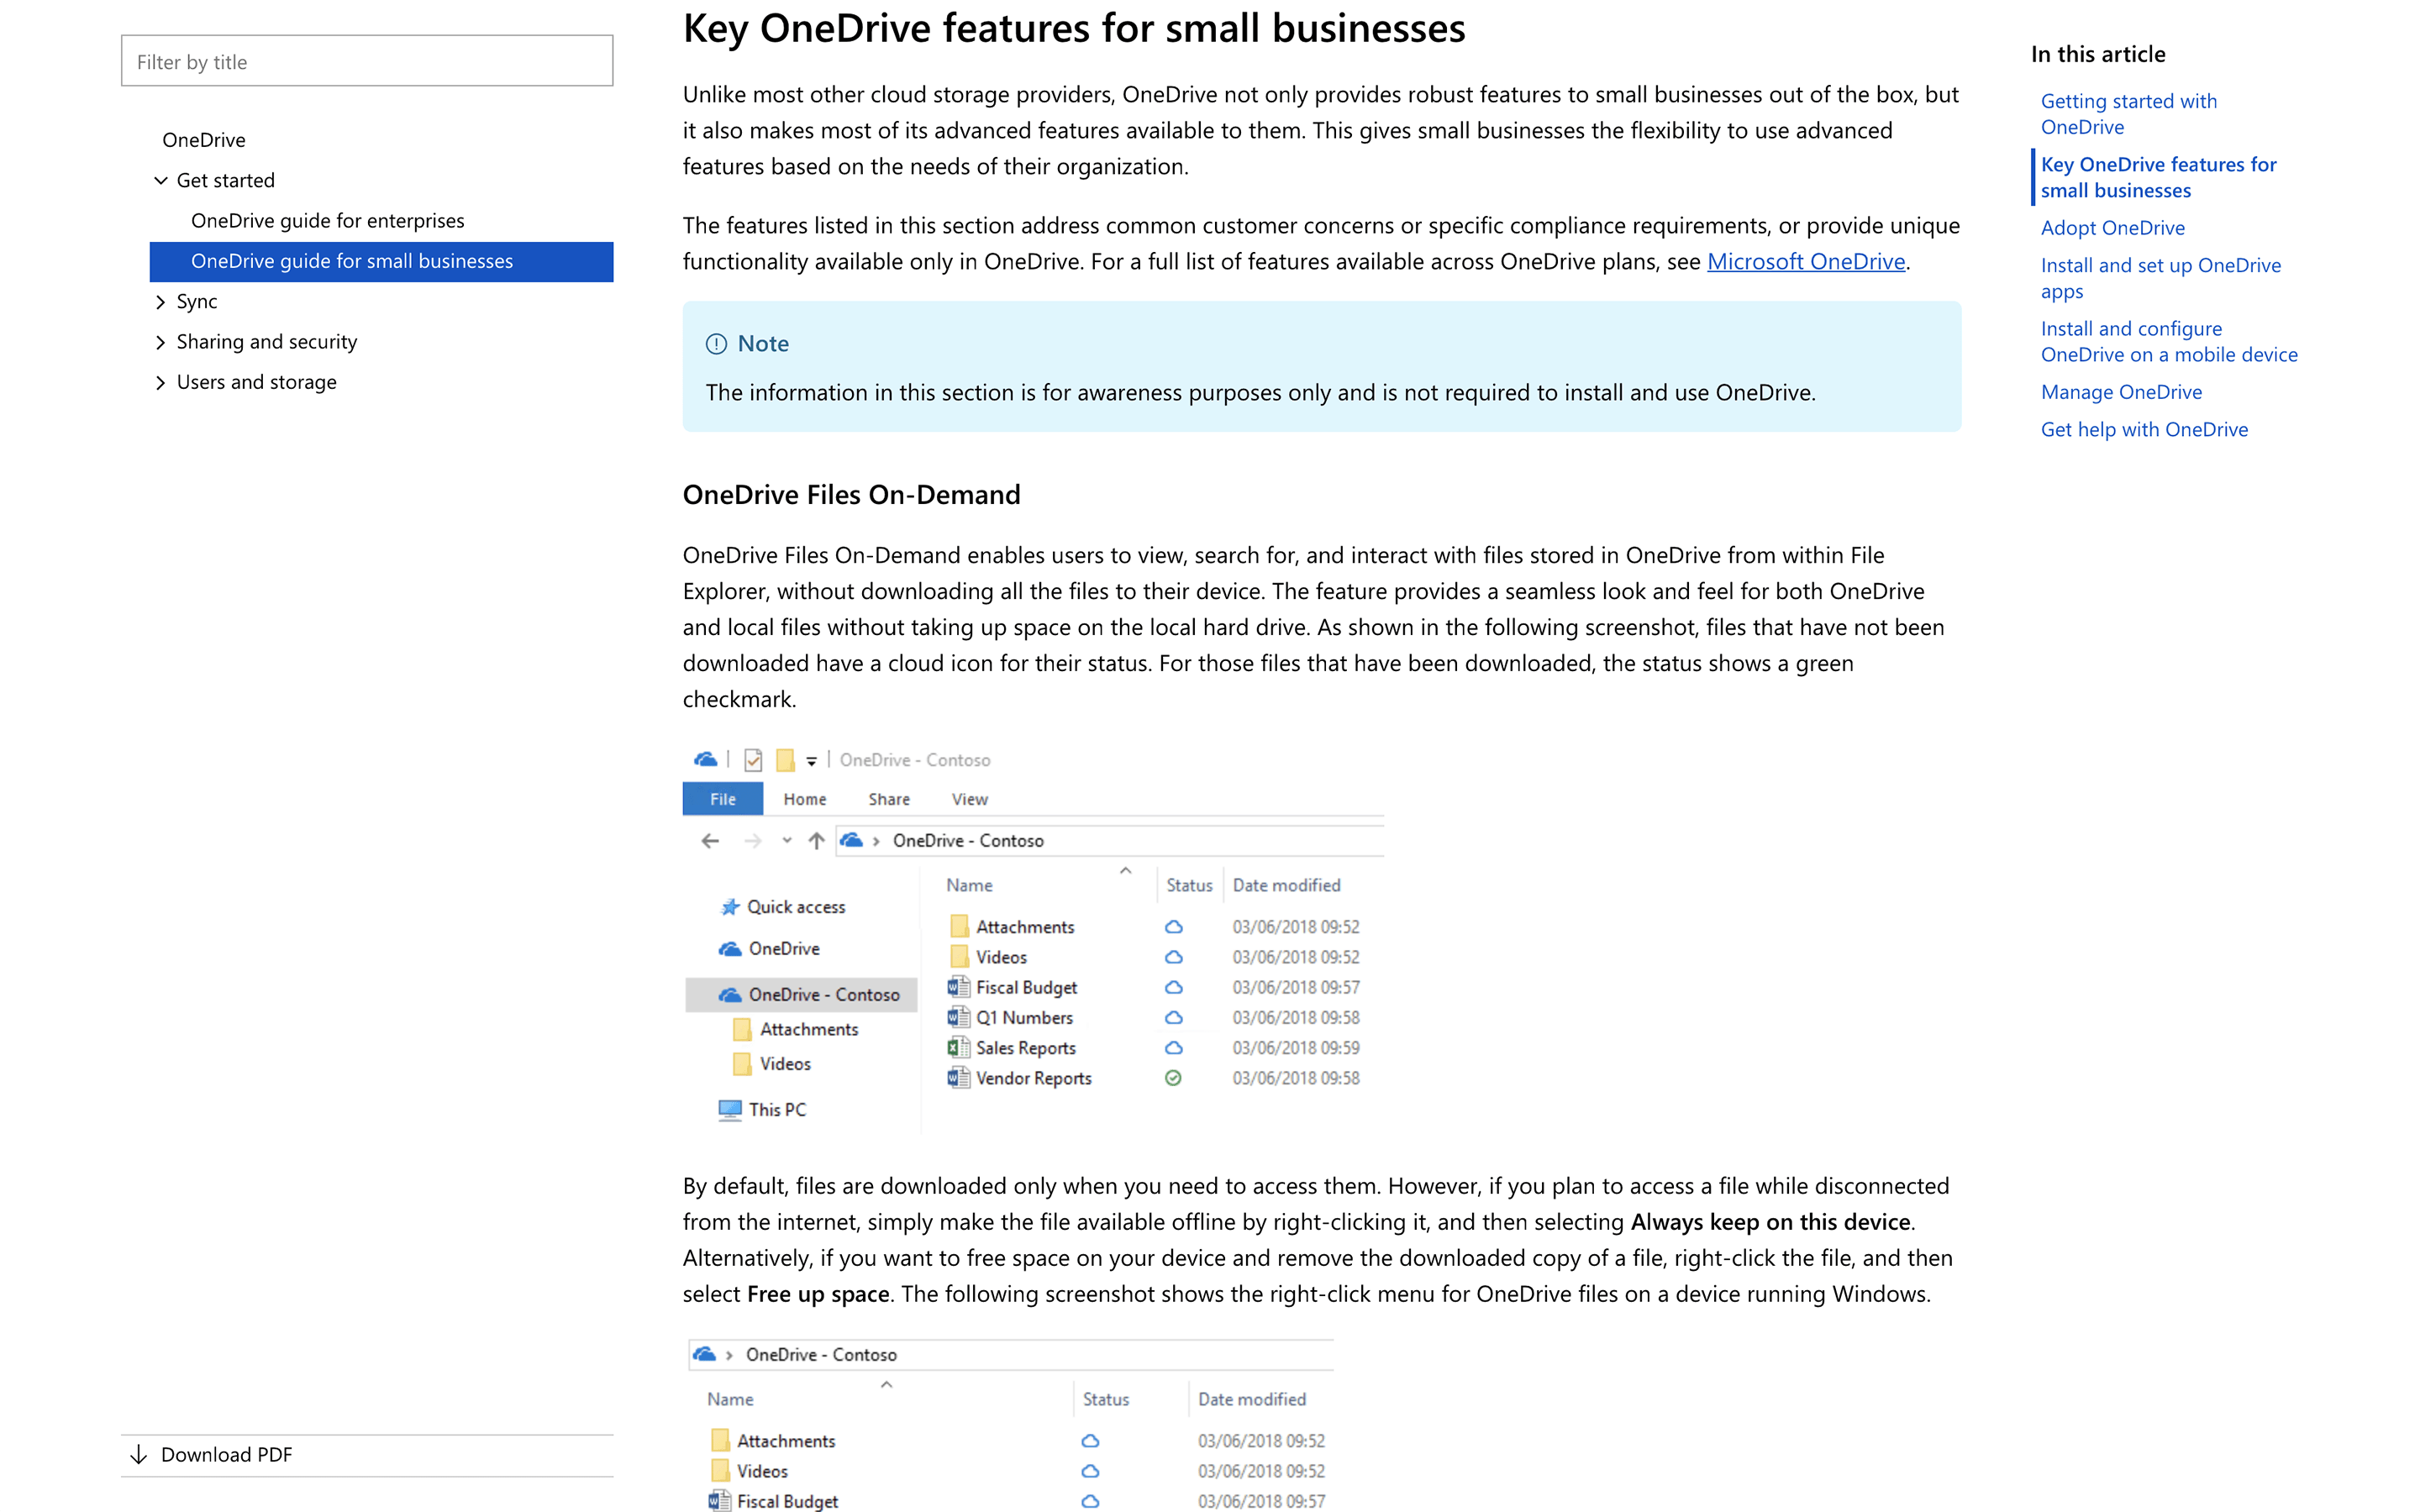 Screenshot of the “Key OneDrive features for small businesses” section